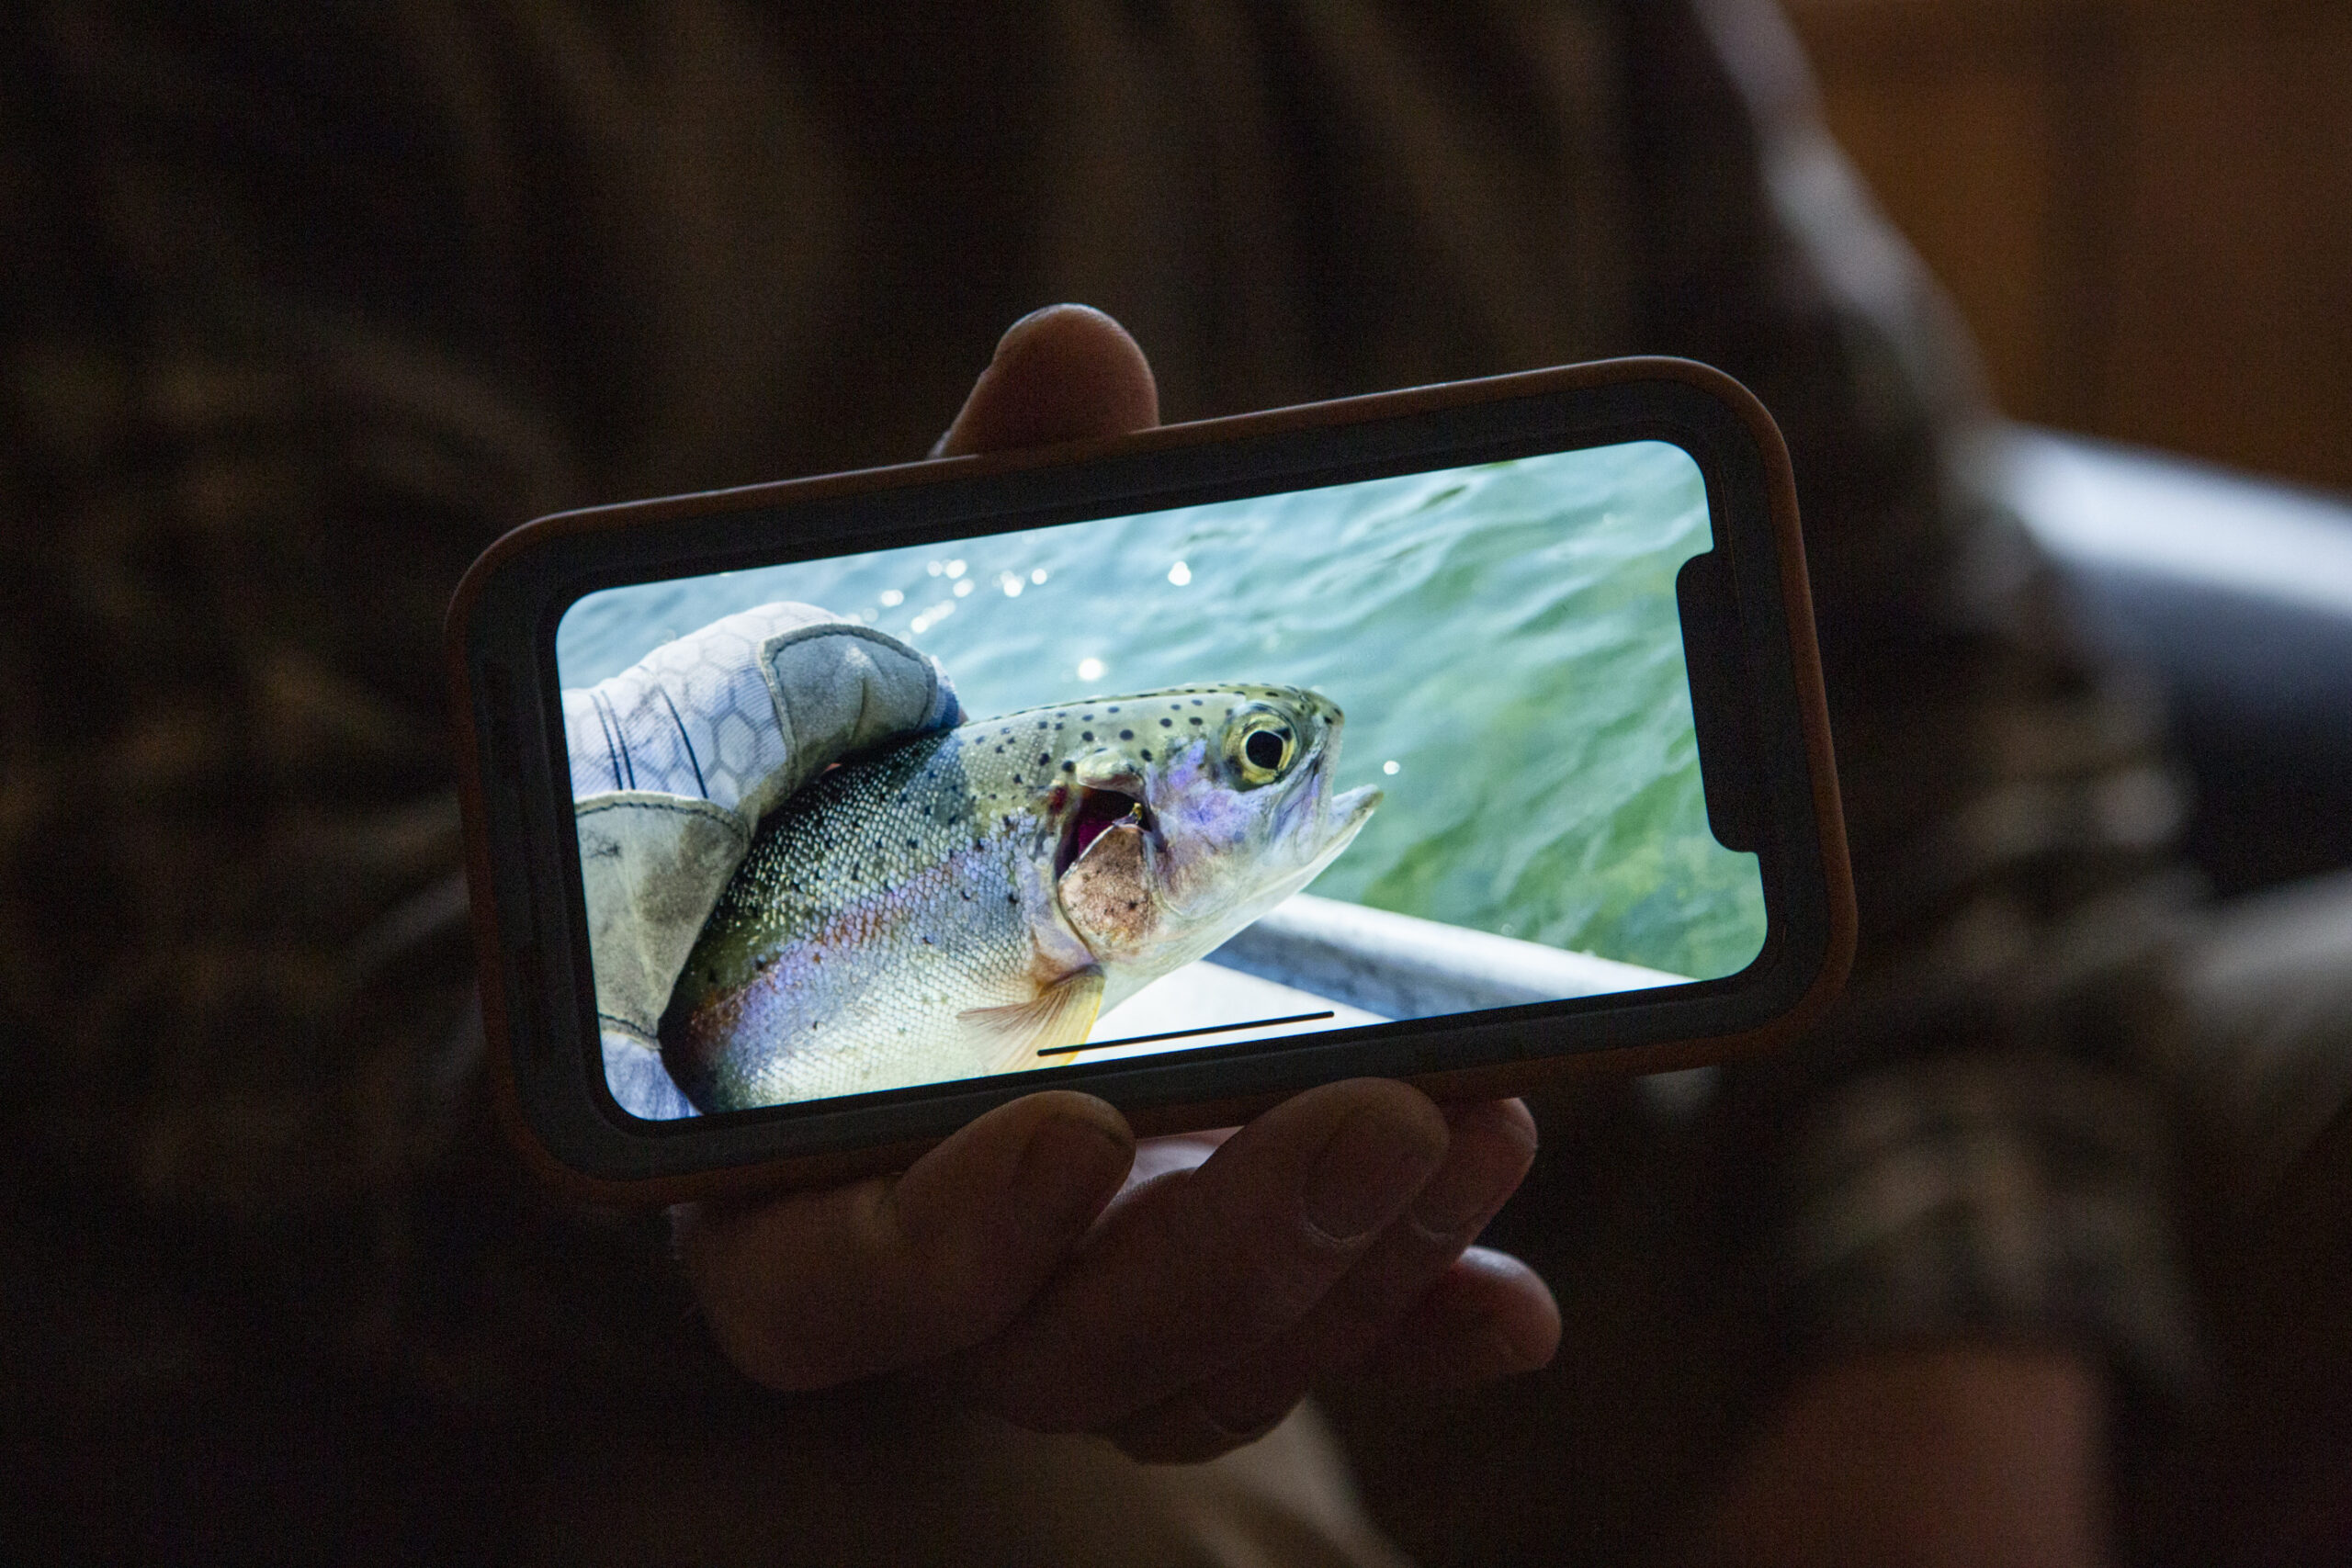 A photo of a deformed fish on a mobile phone